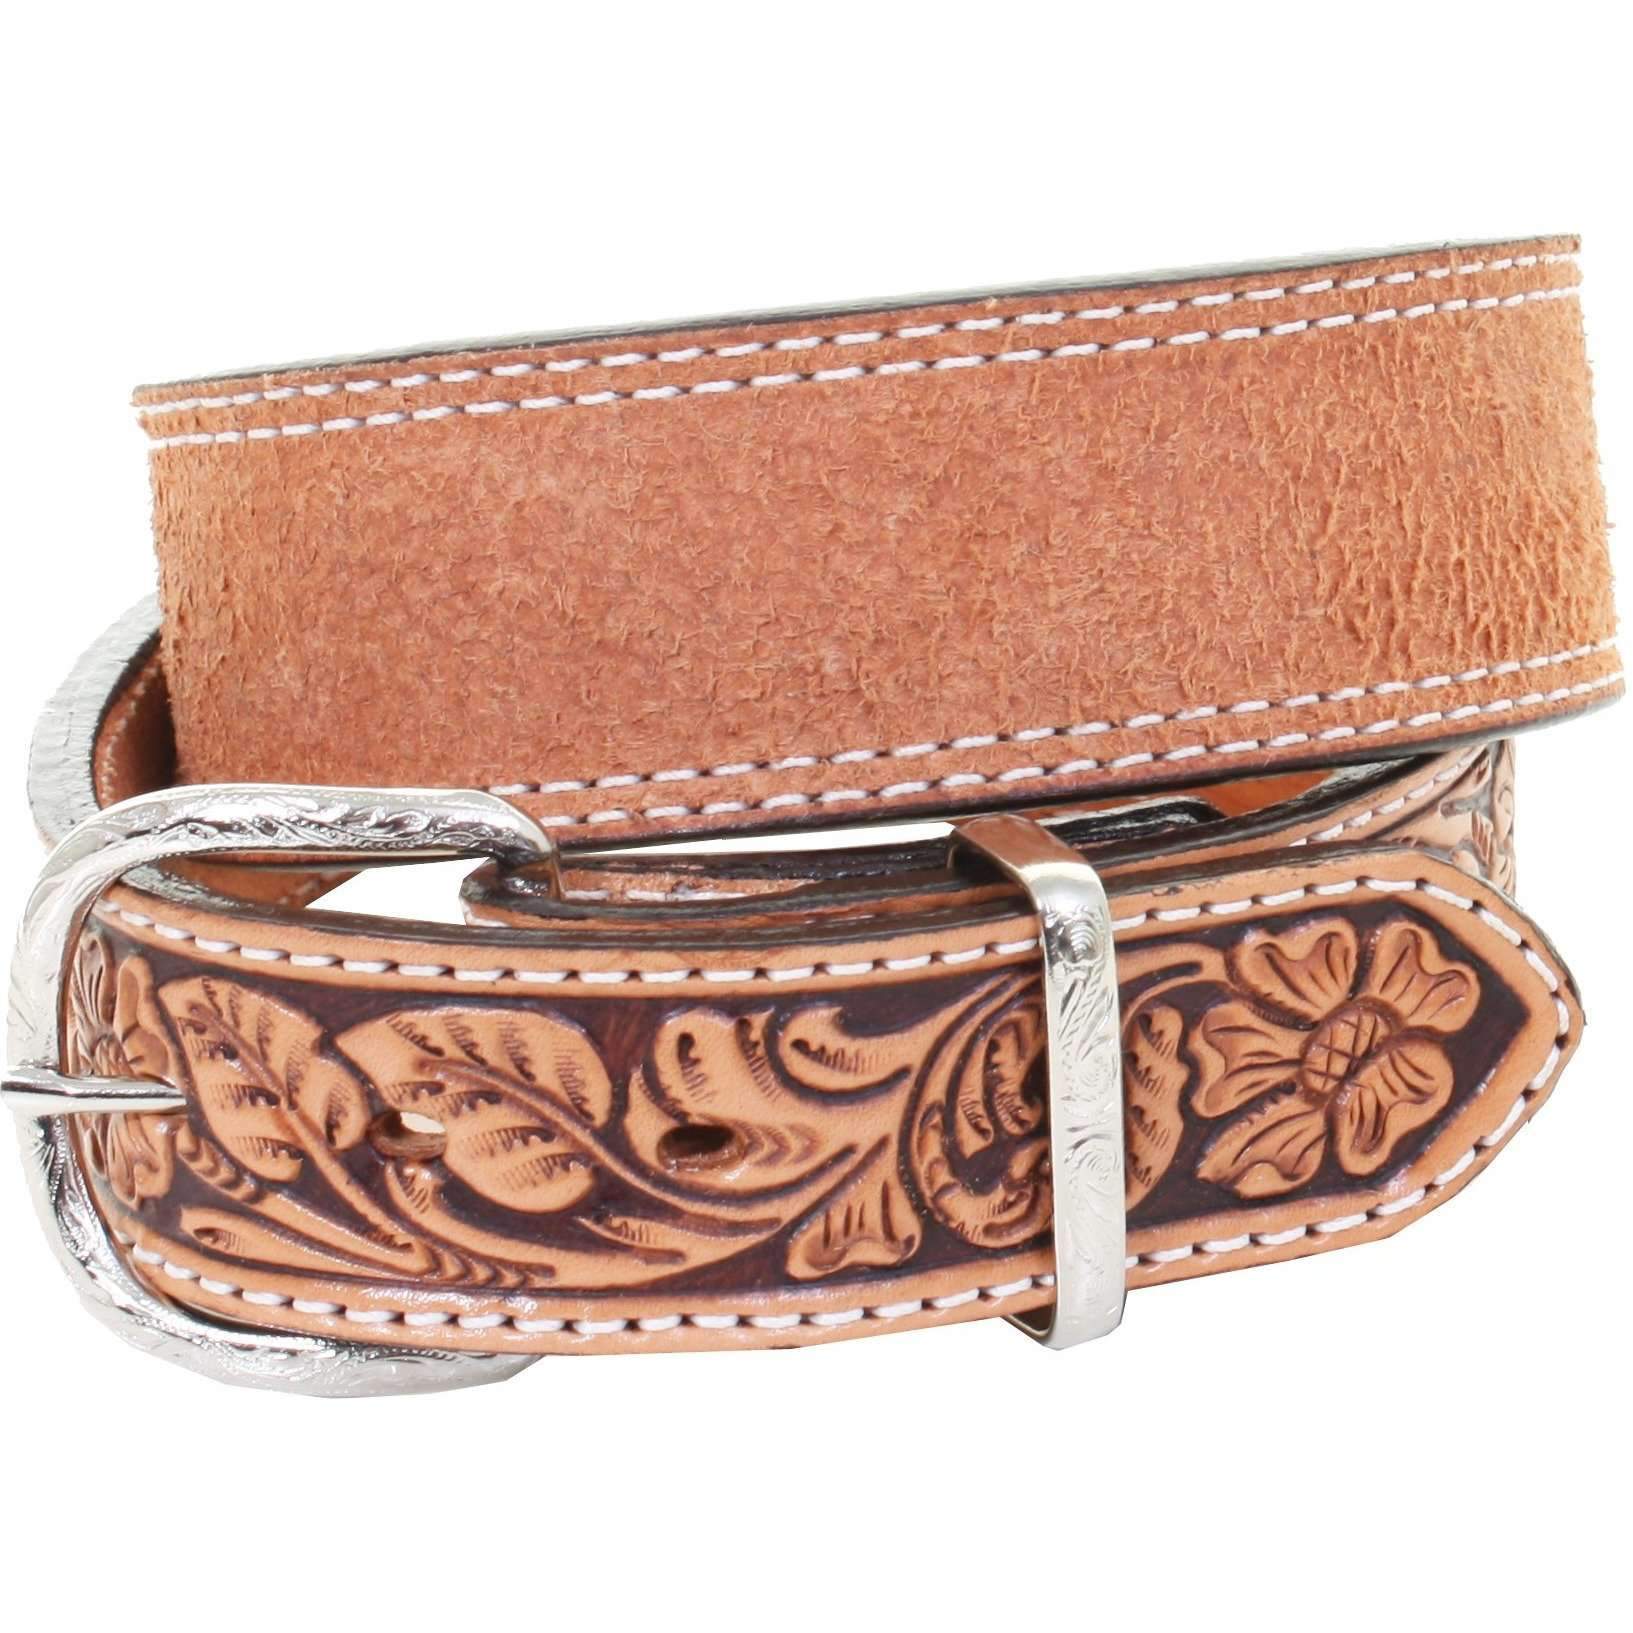 B-1984-35 Fawn Tooled Leather - 19843521